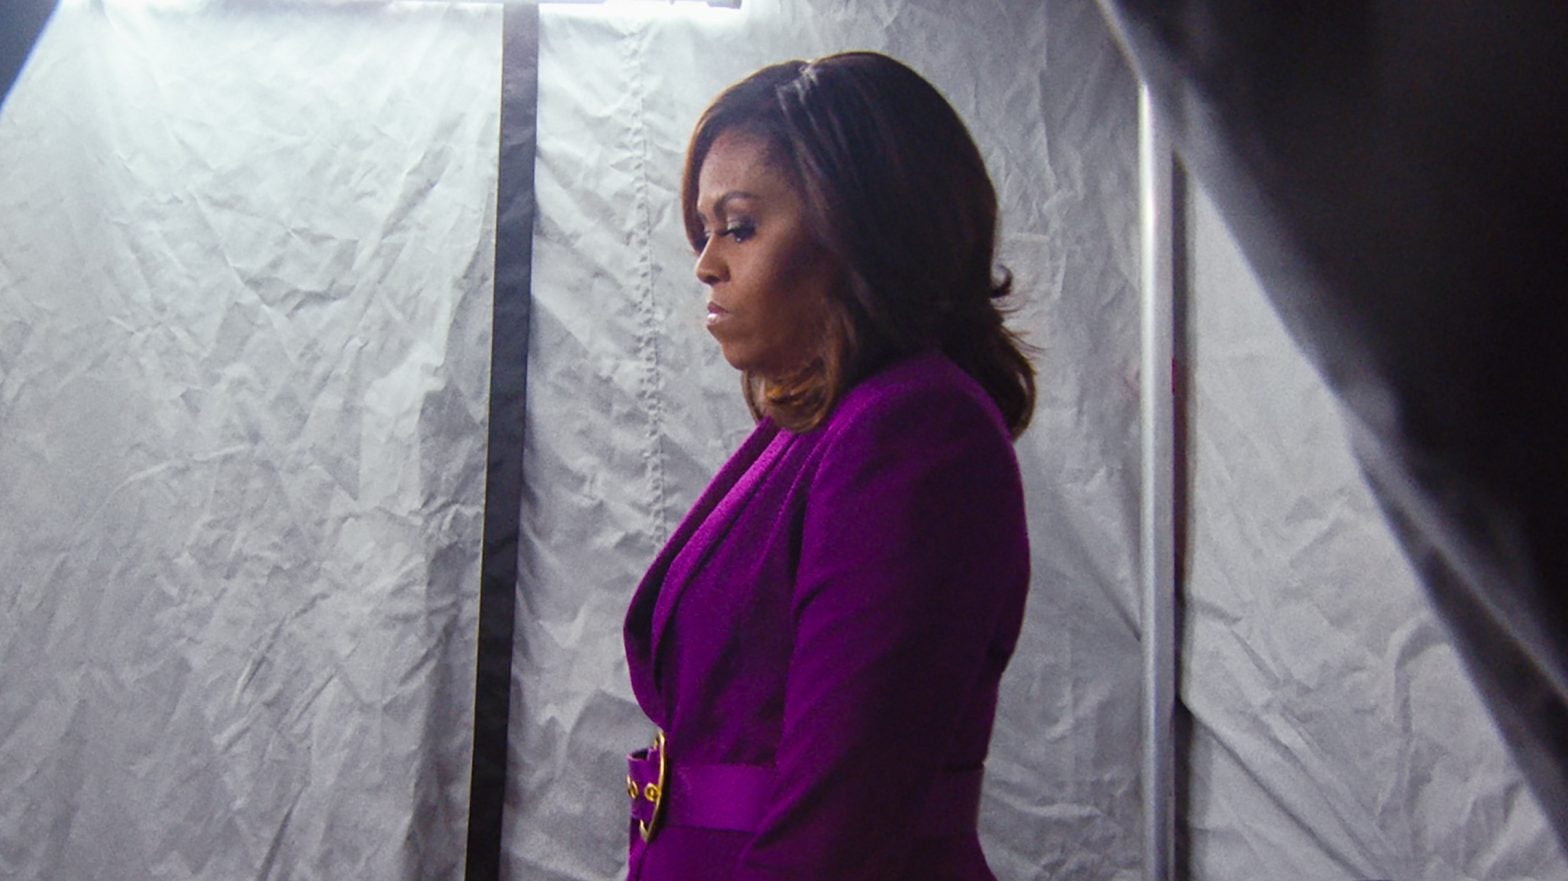 Like So Many Others, Michelle Obama Also Felt 'Low-Grade Depression’ During The Pandemic